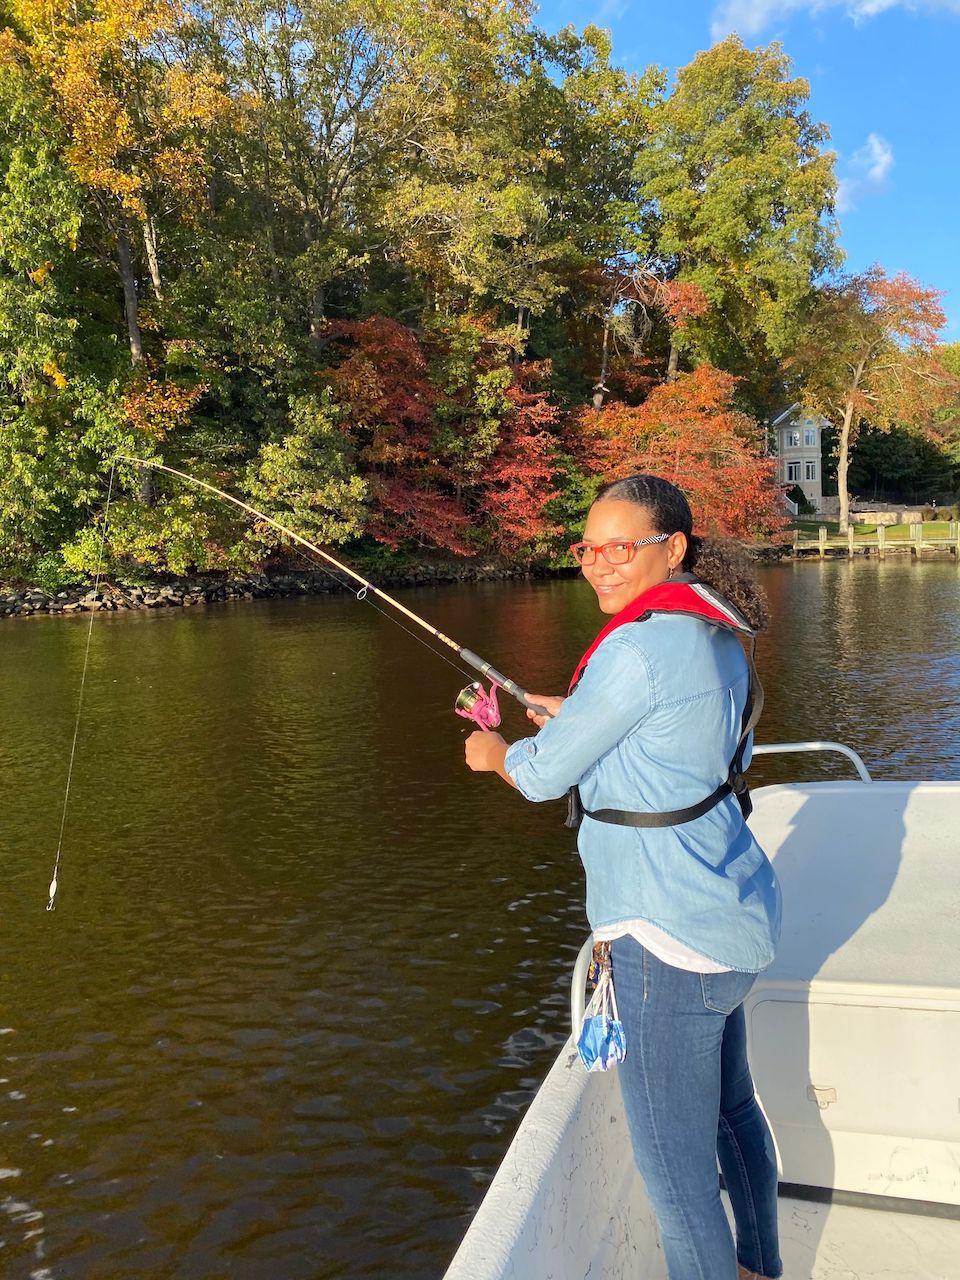 Wearing a life jacket is important for fall fishing and boating. After an accidental overboard in cold waters, it could buy you just enough time to help you safely get back aboard.